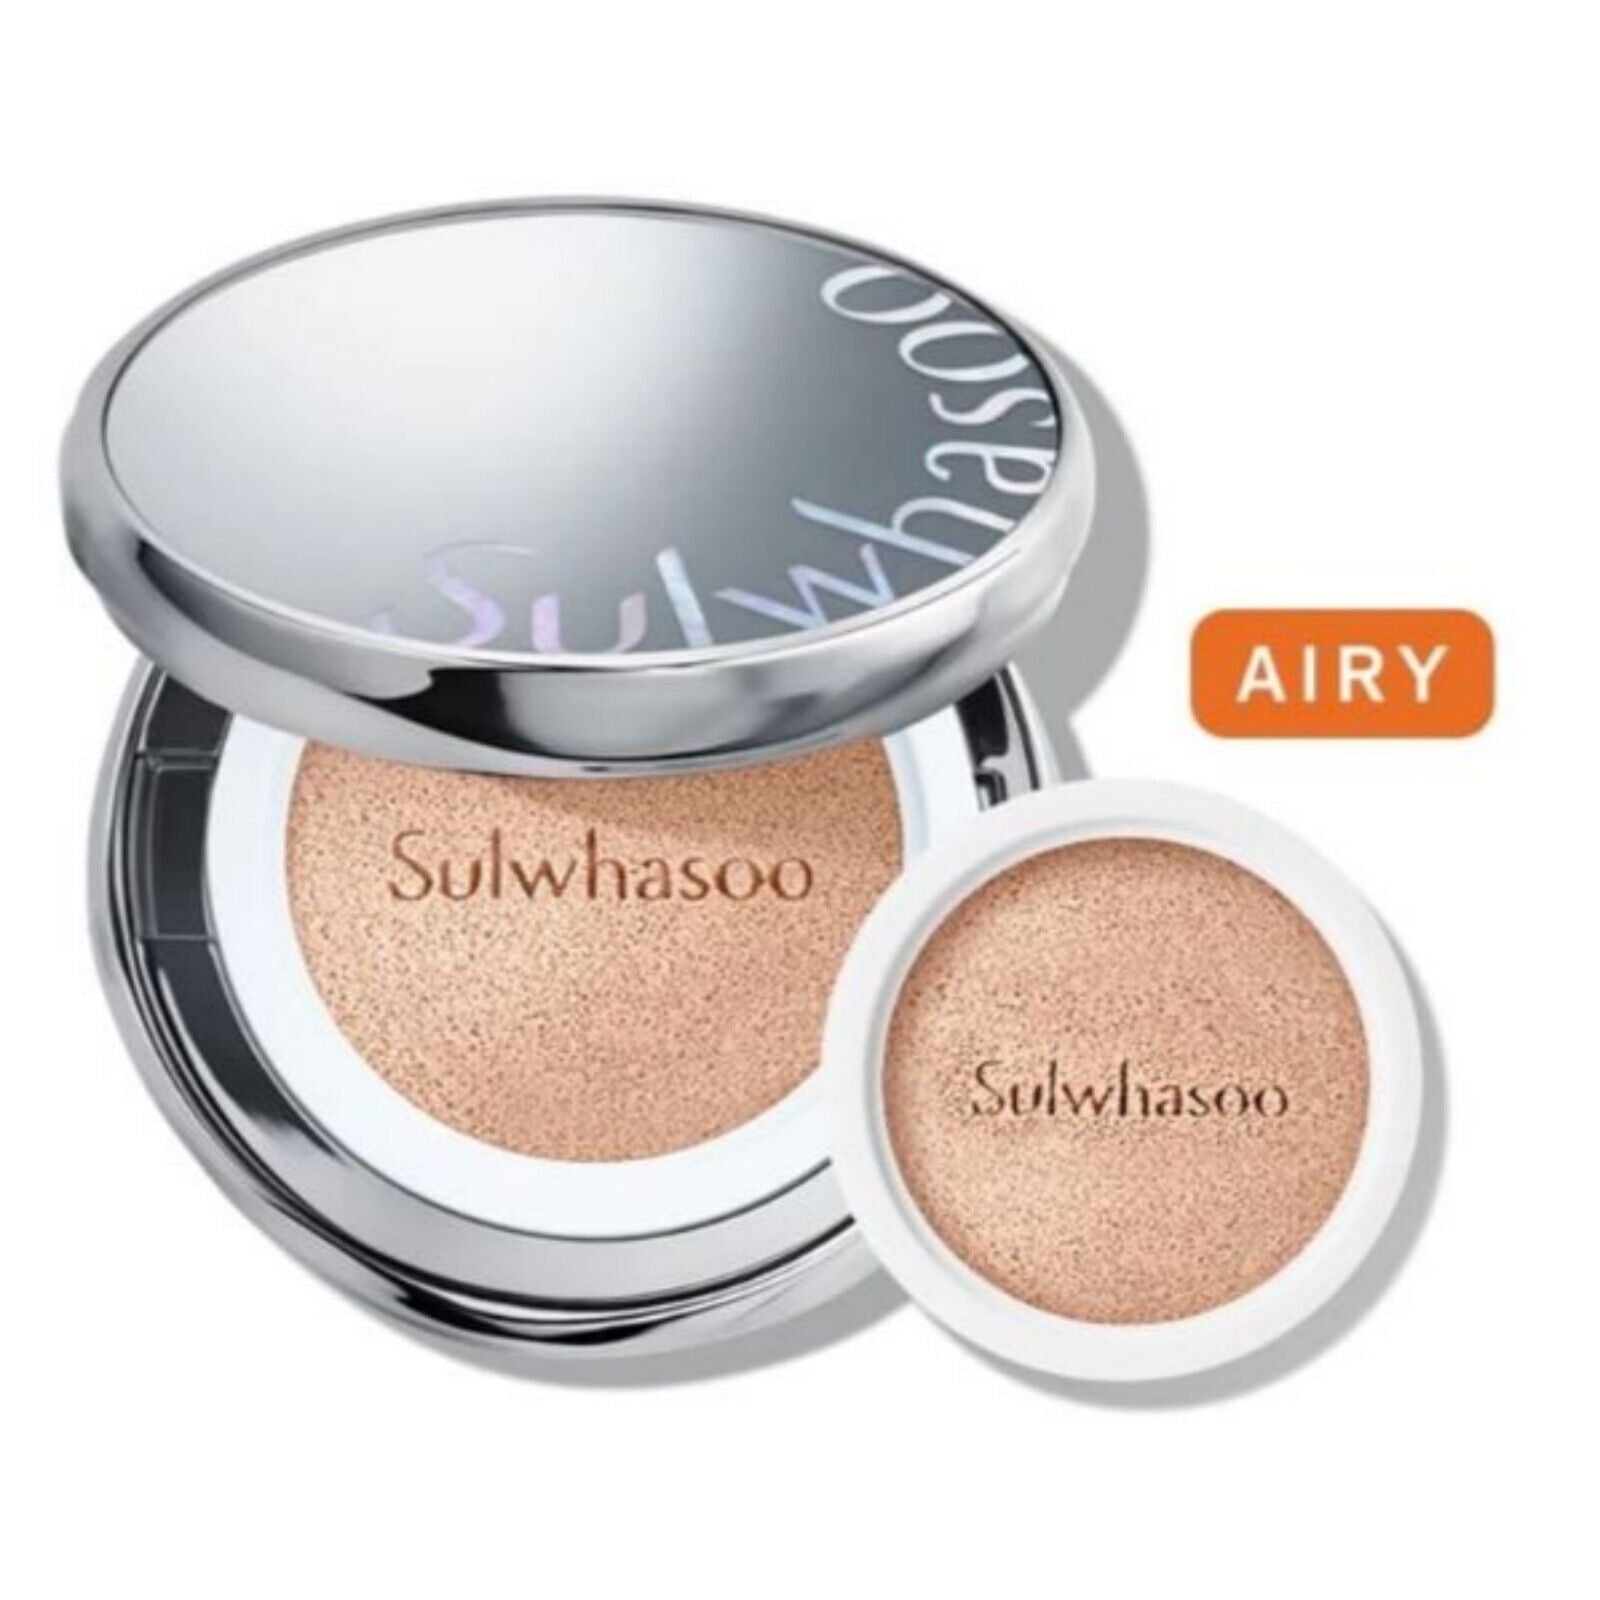 ulwhasoo mineral eye shadow in golden, perfect for a glamorous look. Refill for Sulwhasoo Perfecting Cushion Airy 15g.